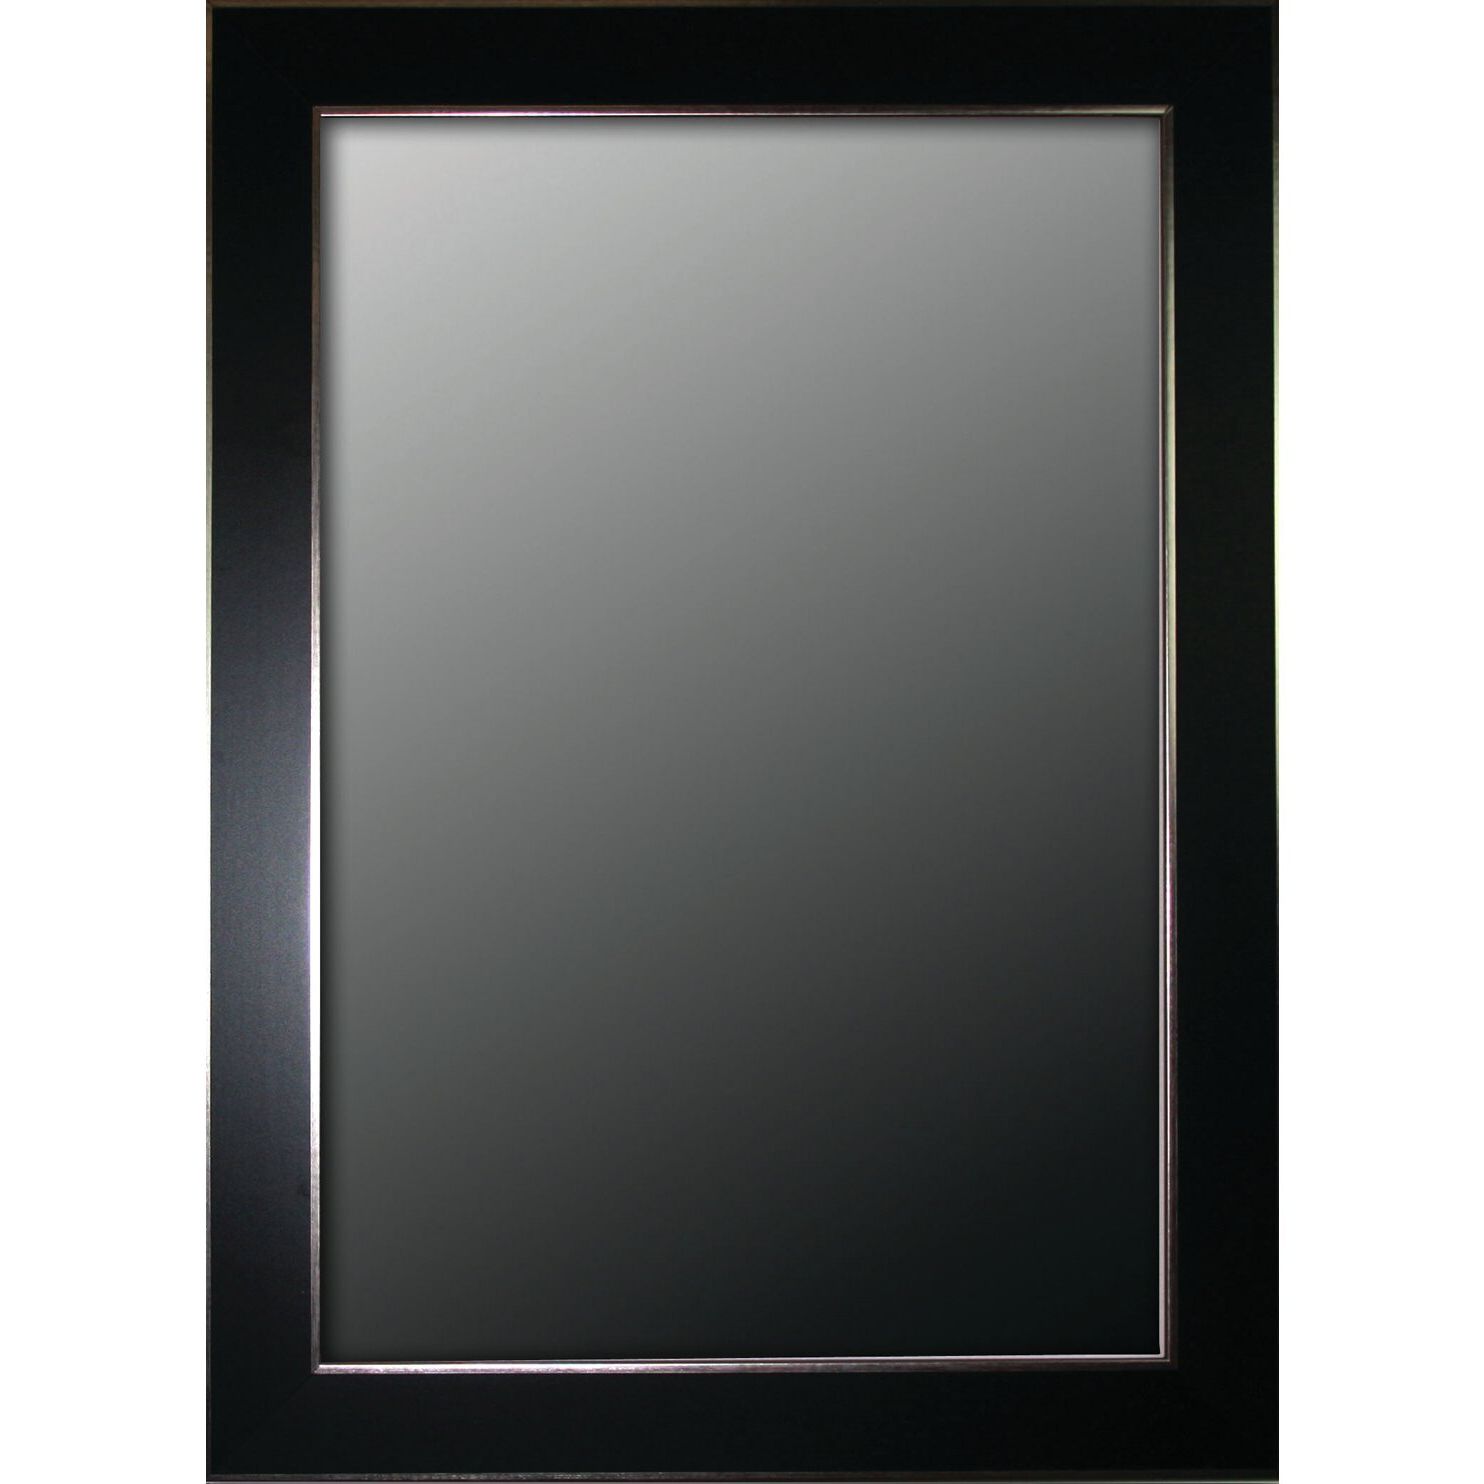 Most Popular Second Look Mirrors Semi Matte Black With Silver Trim Edges Wall Mirror With Regard To Smoke Edge Wall Mirrors (View 4 of 15)